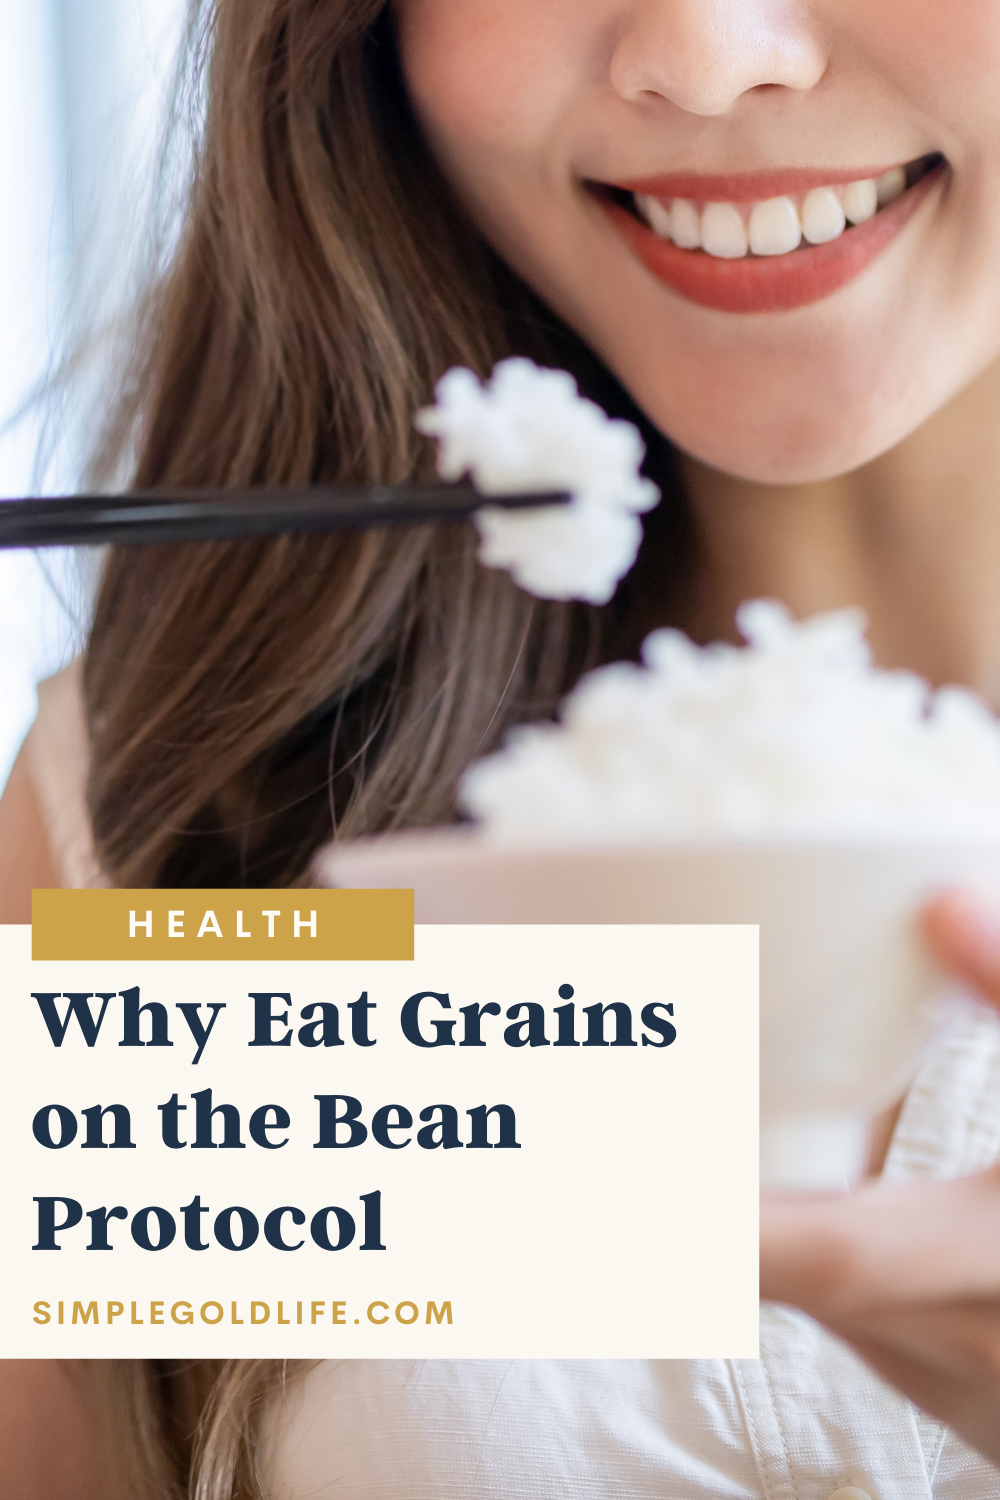 Benefits of grains on the Bean Protocol 4.png